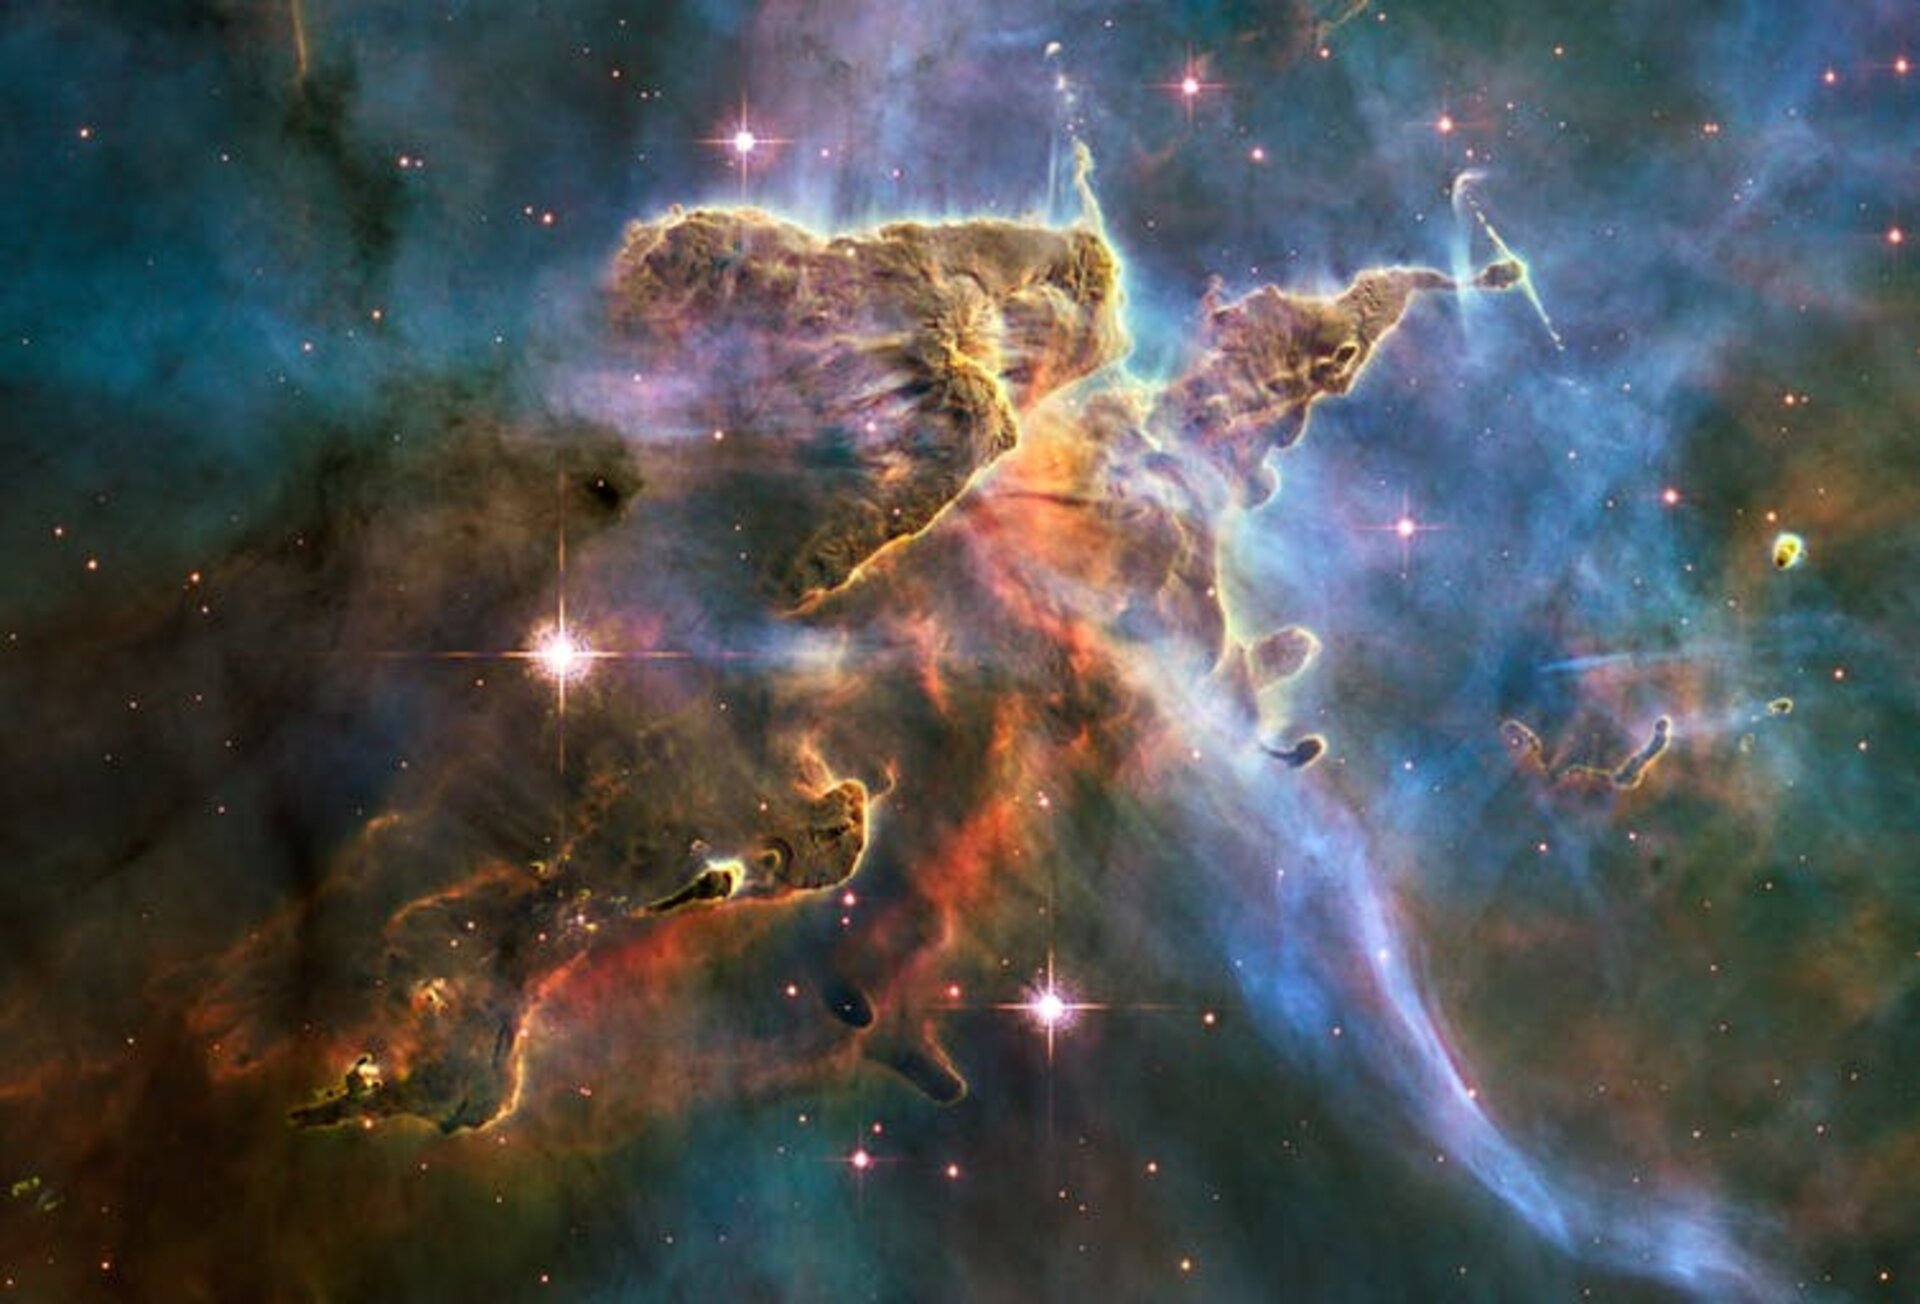 Dust in space: 10 cool things to know, Space